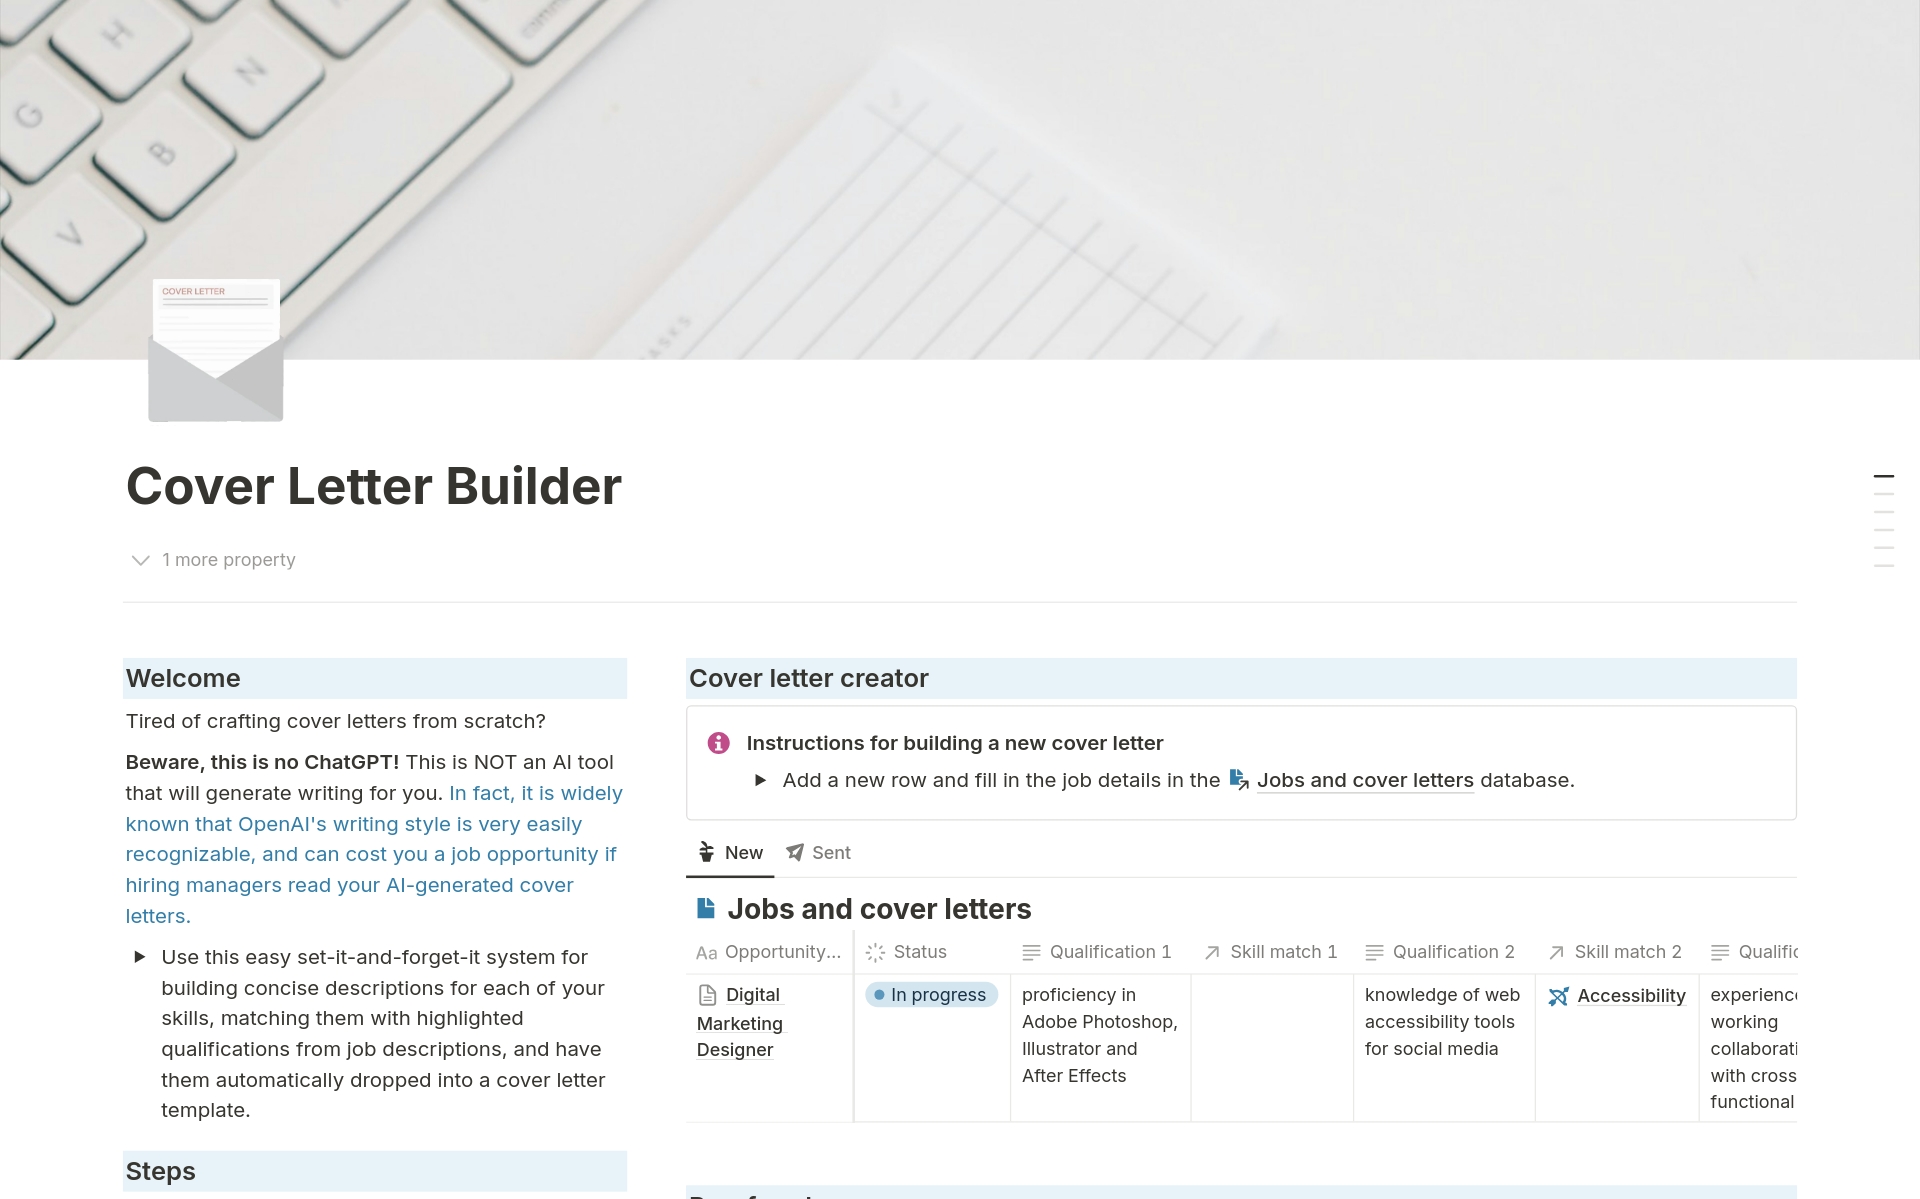 Tired of crafting cover letters from scratch? Always include a cover letter when applying to your favourite companies. With the Cover Letter Builder, creating a cover letter couldn't get easier. 
